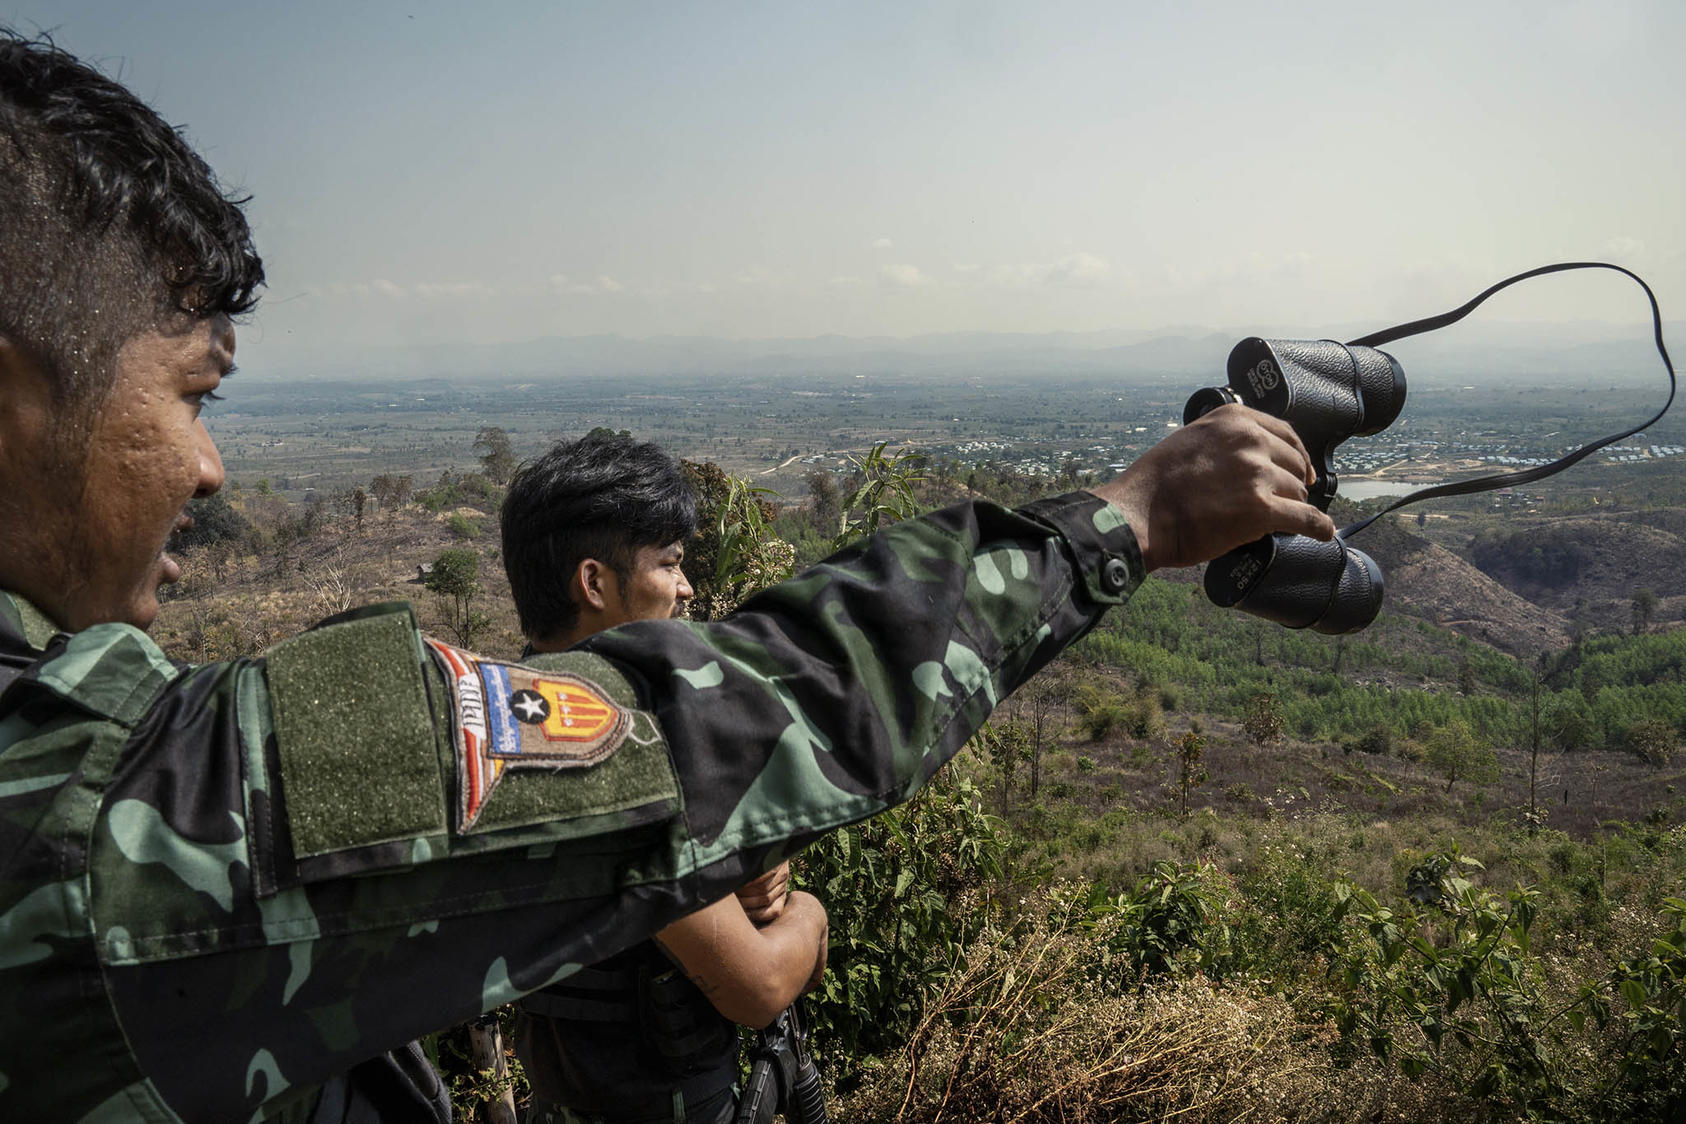 Rebel fighters of the People’s Defense Forces survey government military positions in Kayin State, Myanmar, March 2022. China has chosen to bolster Myanmar’s military fighting a growing popular resistance movement. (Adam Dean/The New York Times)